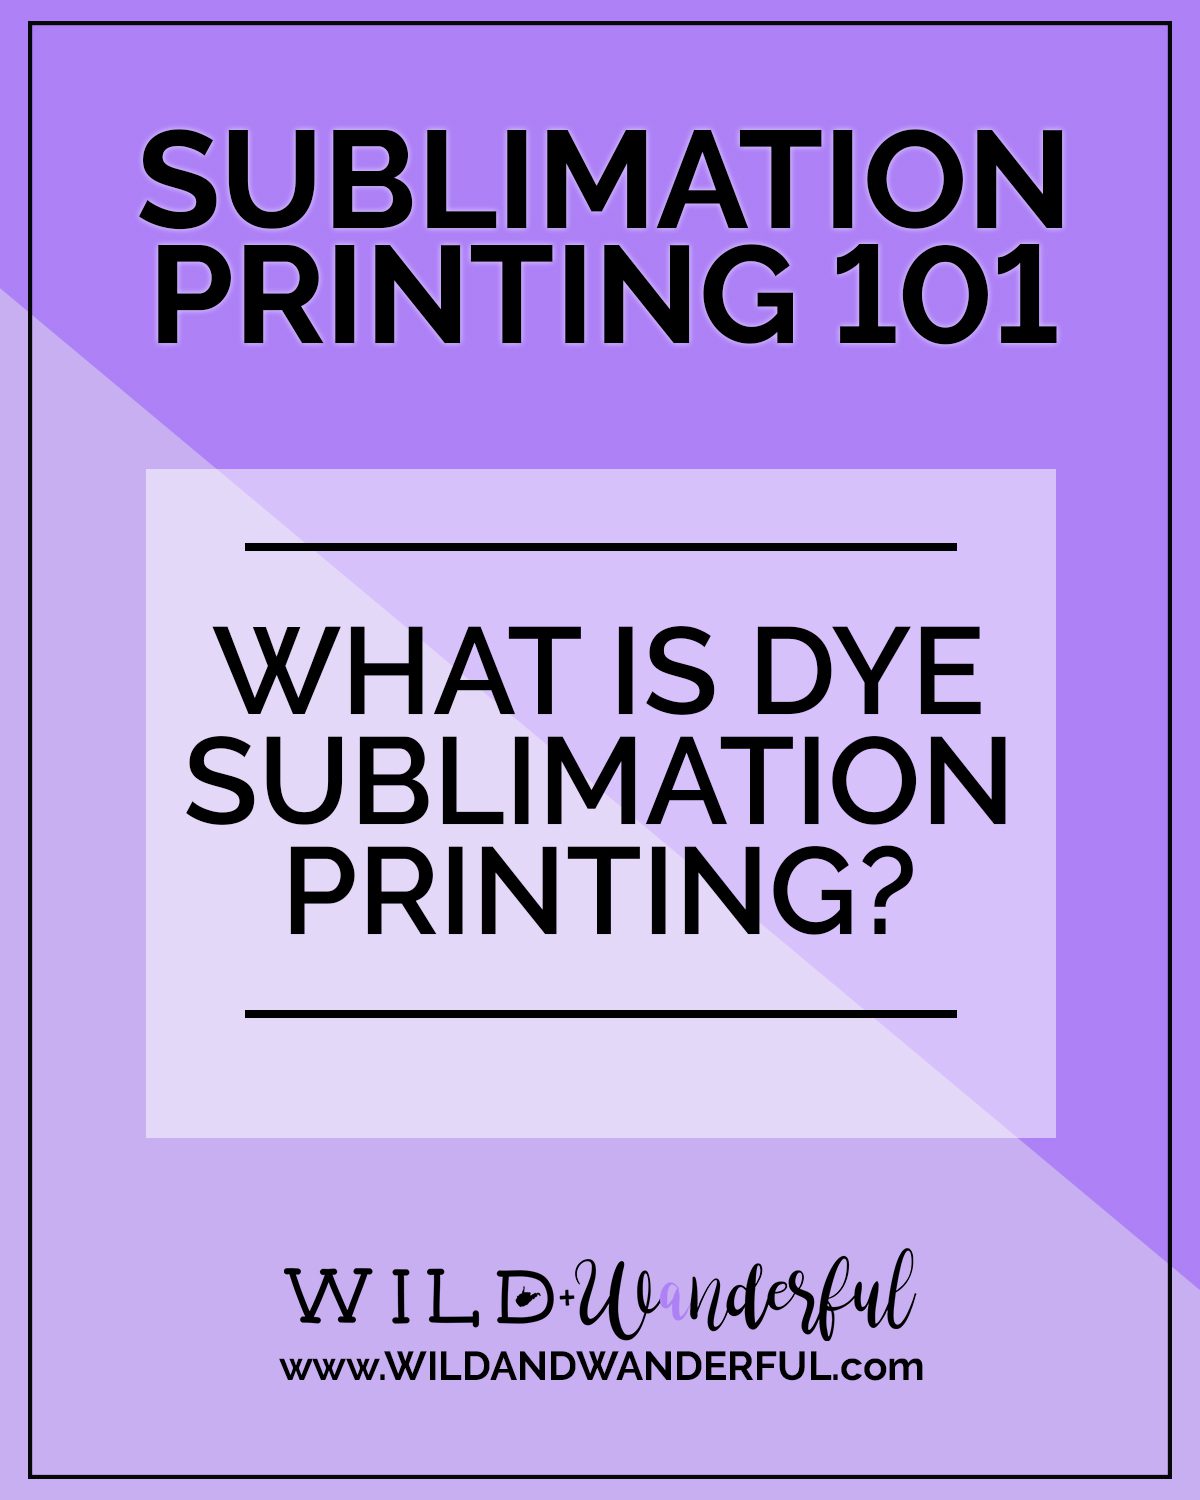 A-SUB 110 Sheets Sublimation Paper and 10 Sheets Dark Cotton Fabric Iron-on  Heat Transfer Paper